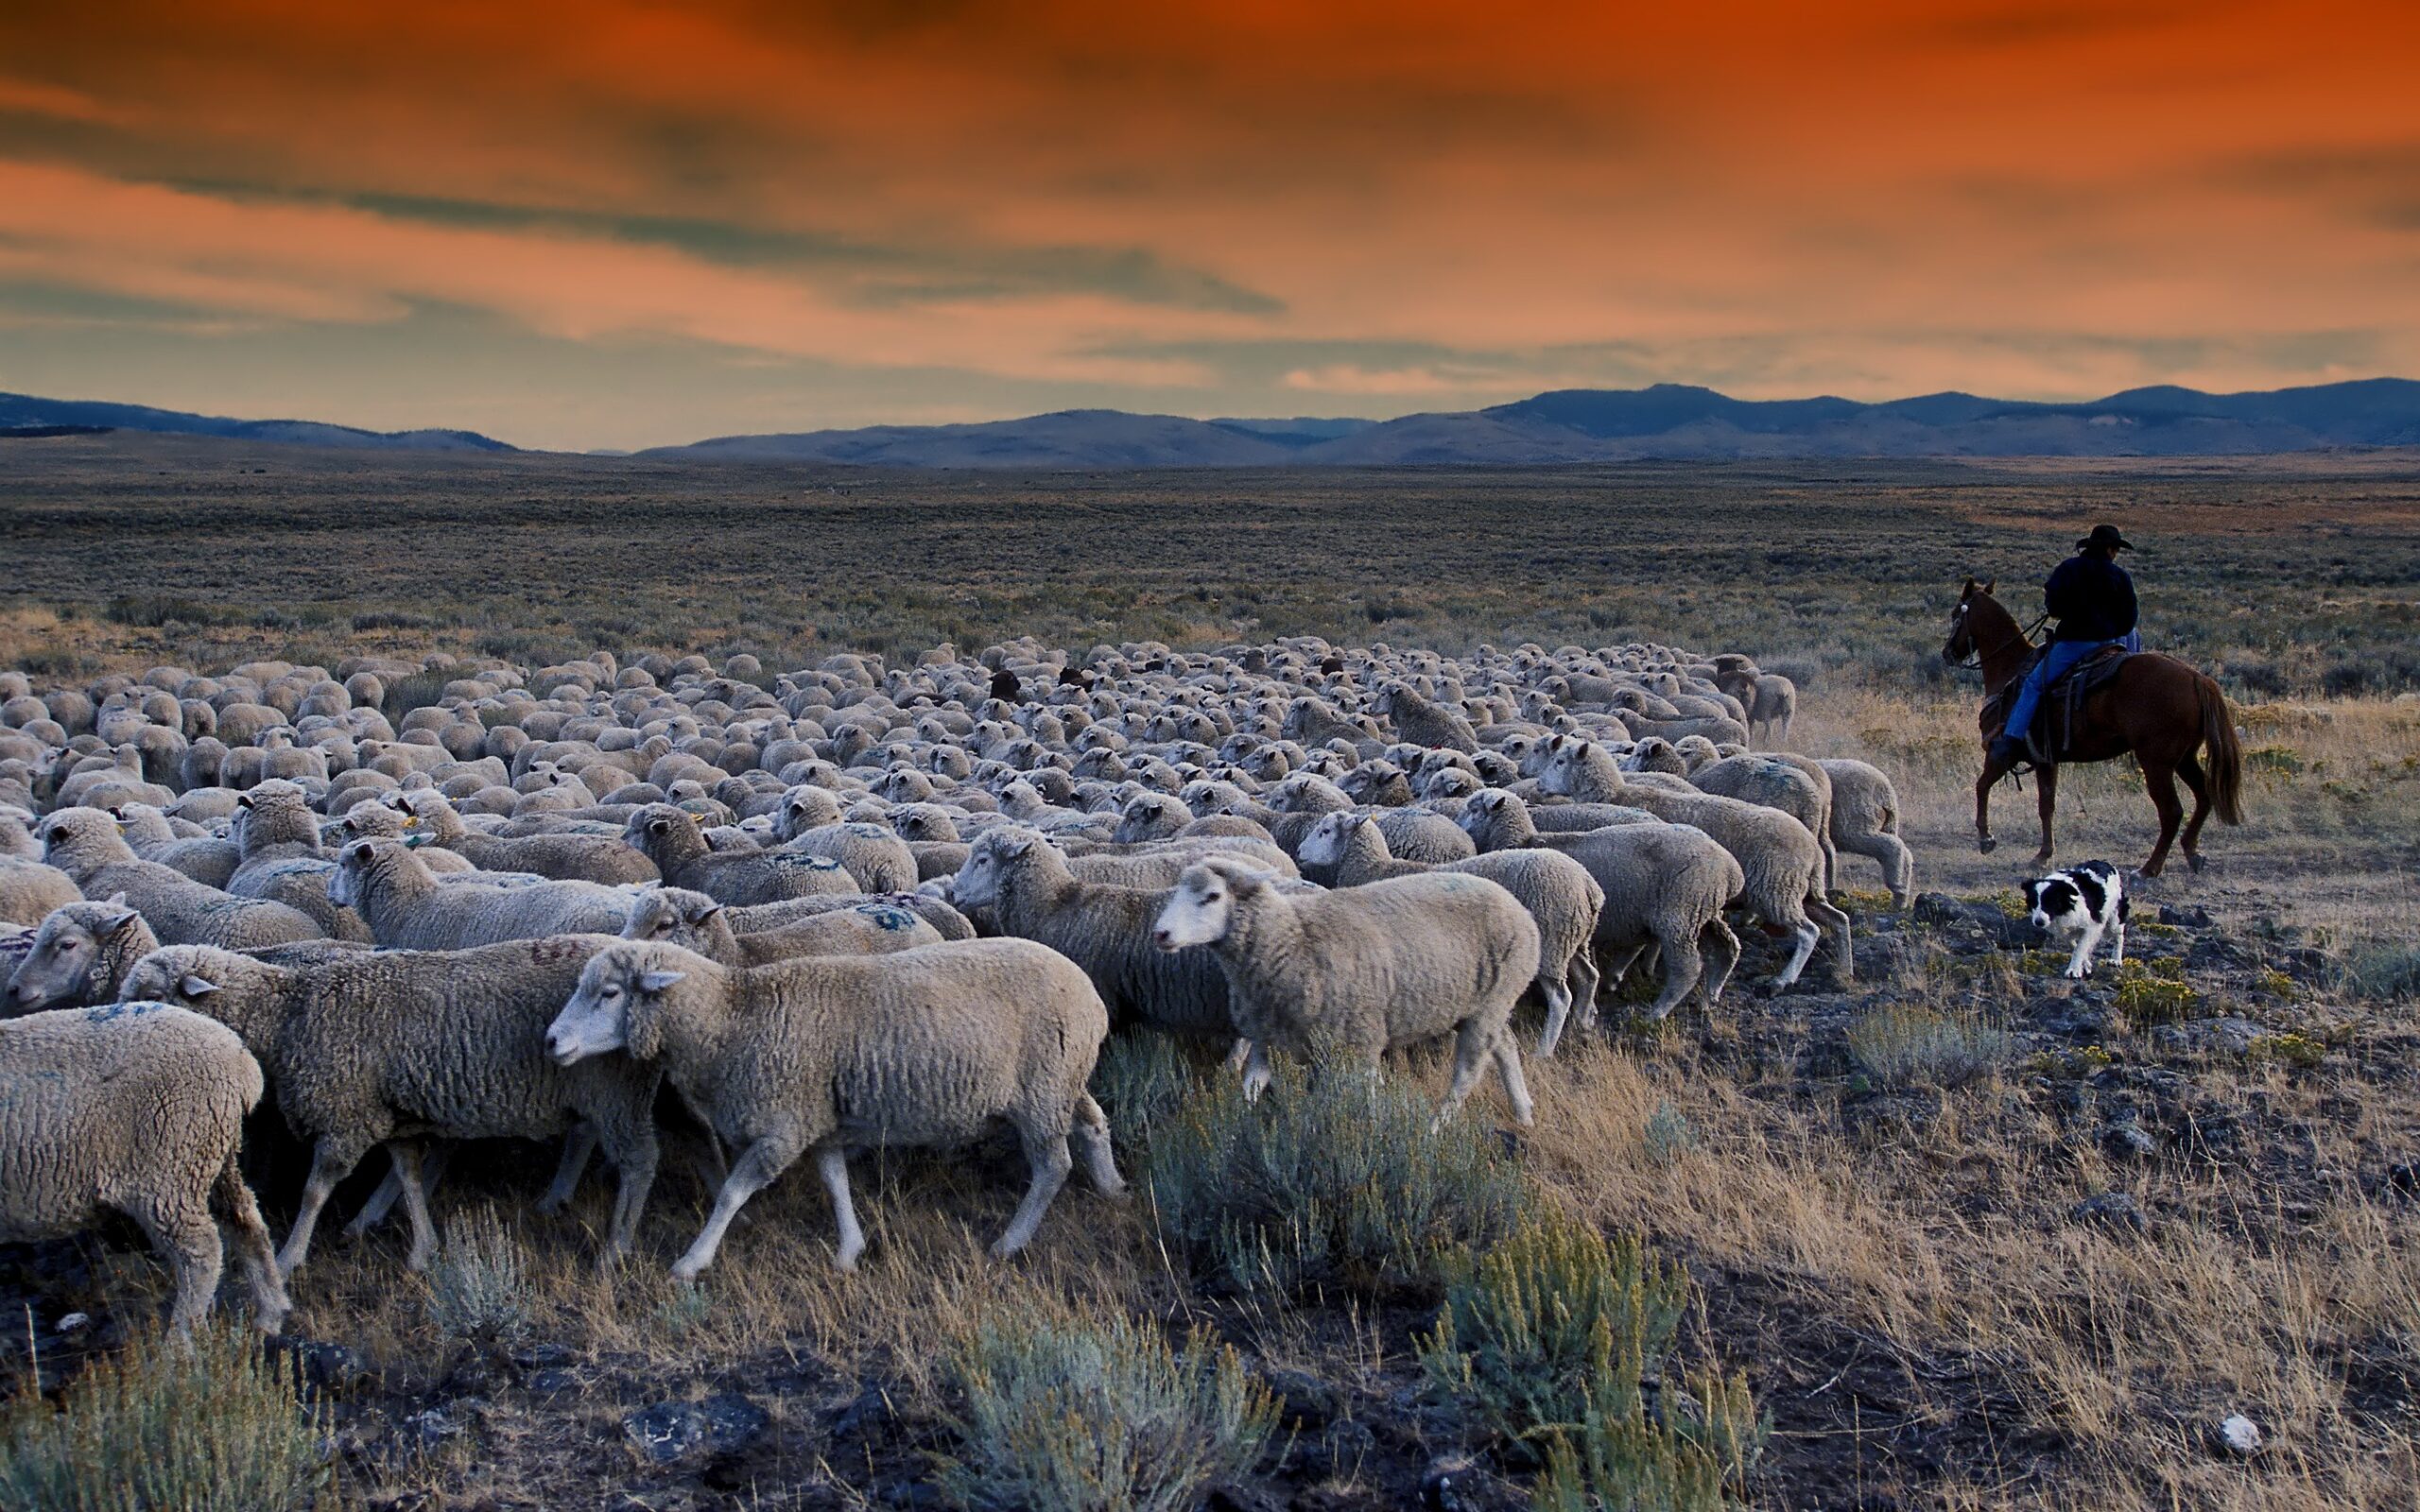 a cattle rancher on a horse watches as a dog runs up and down a line of sheep to herd them in a certain direction